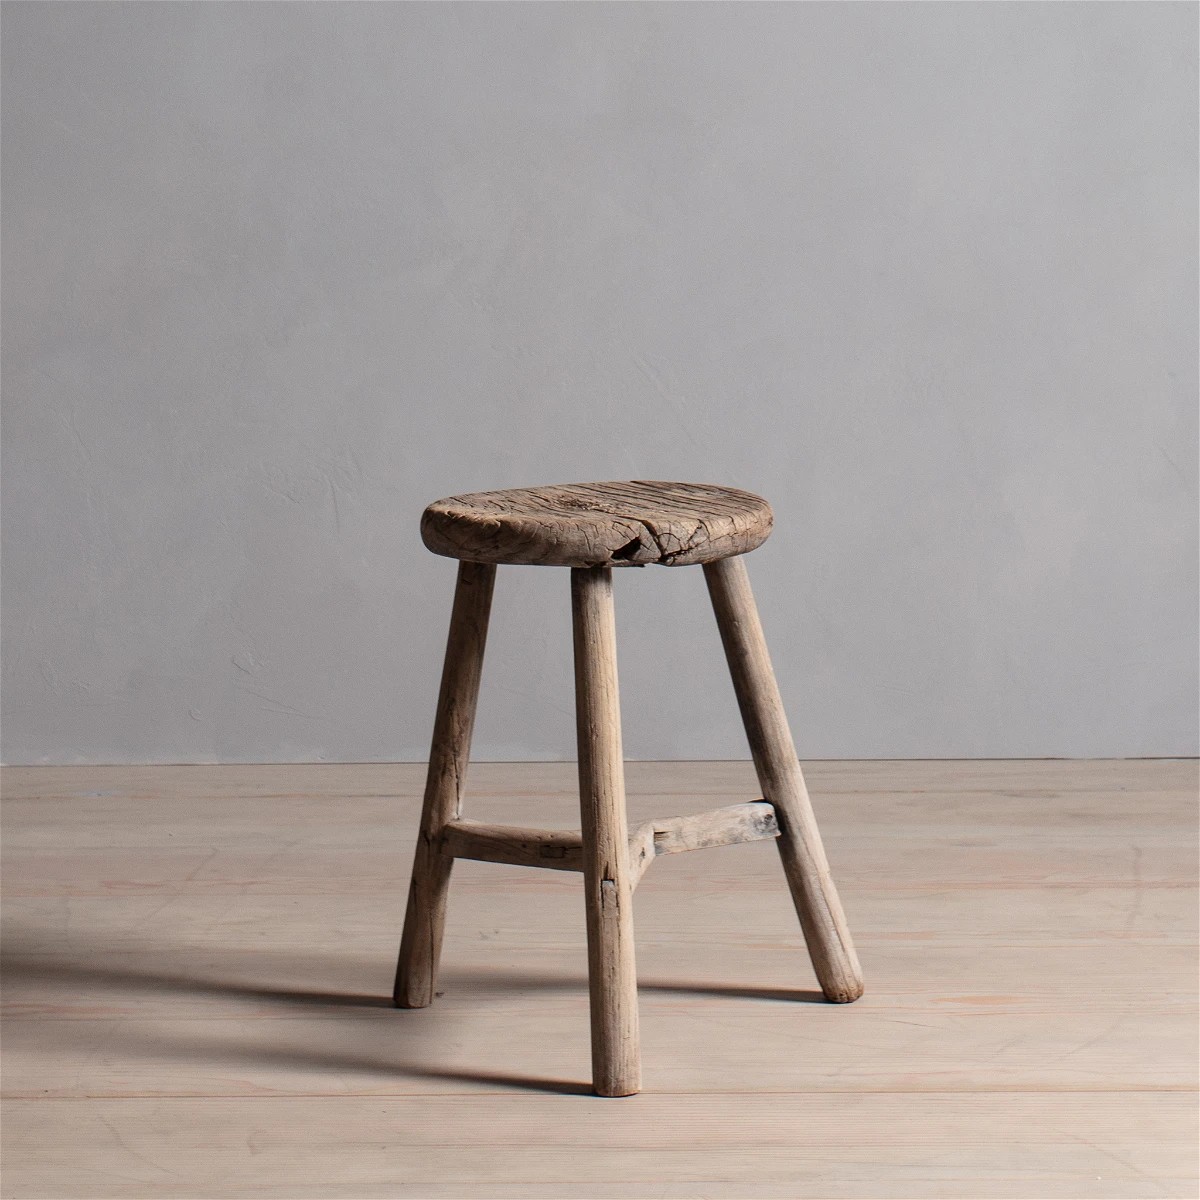 The image of an Vintage Stool product